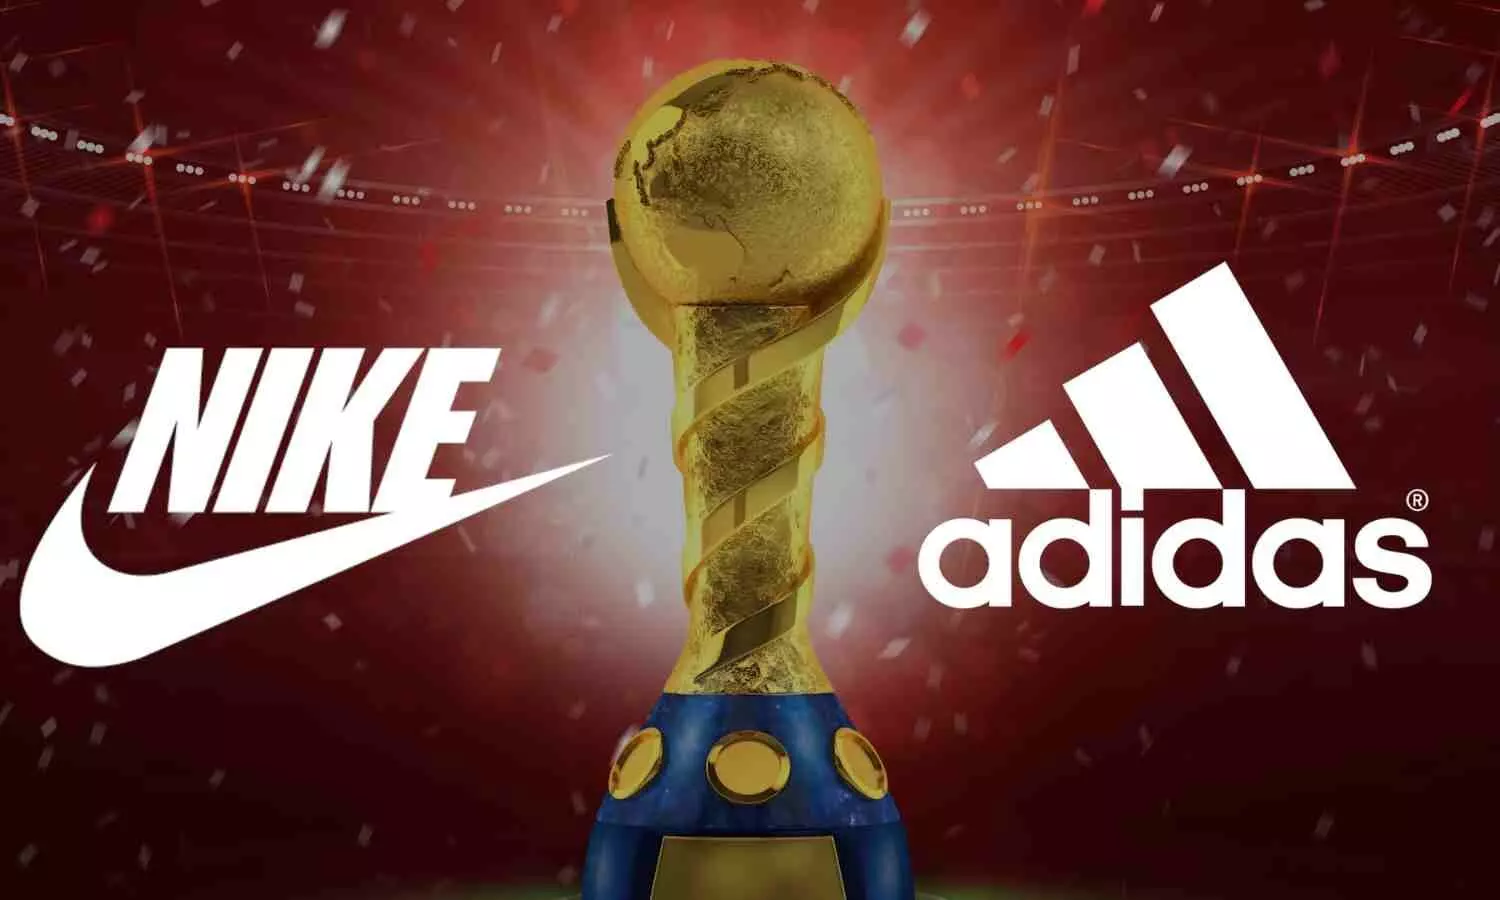 FIFA WC 2022 Adidas and Nike also played the final match in qatar